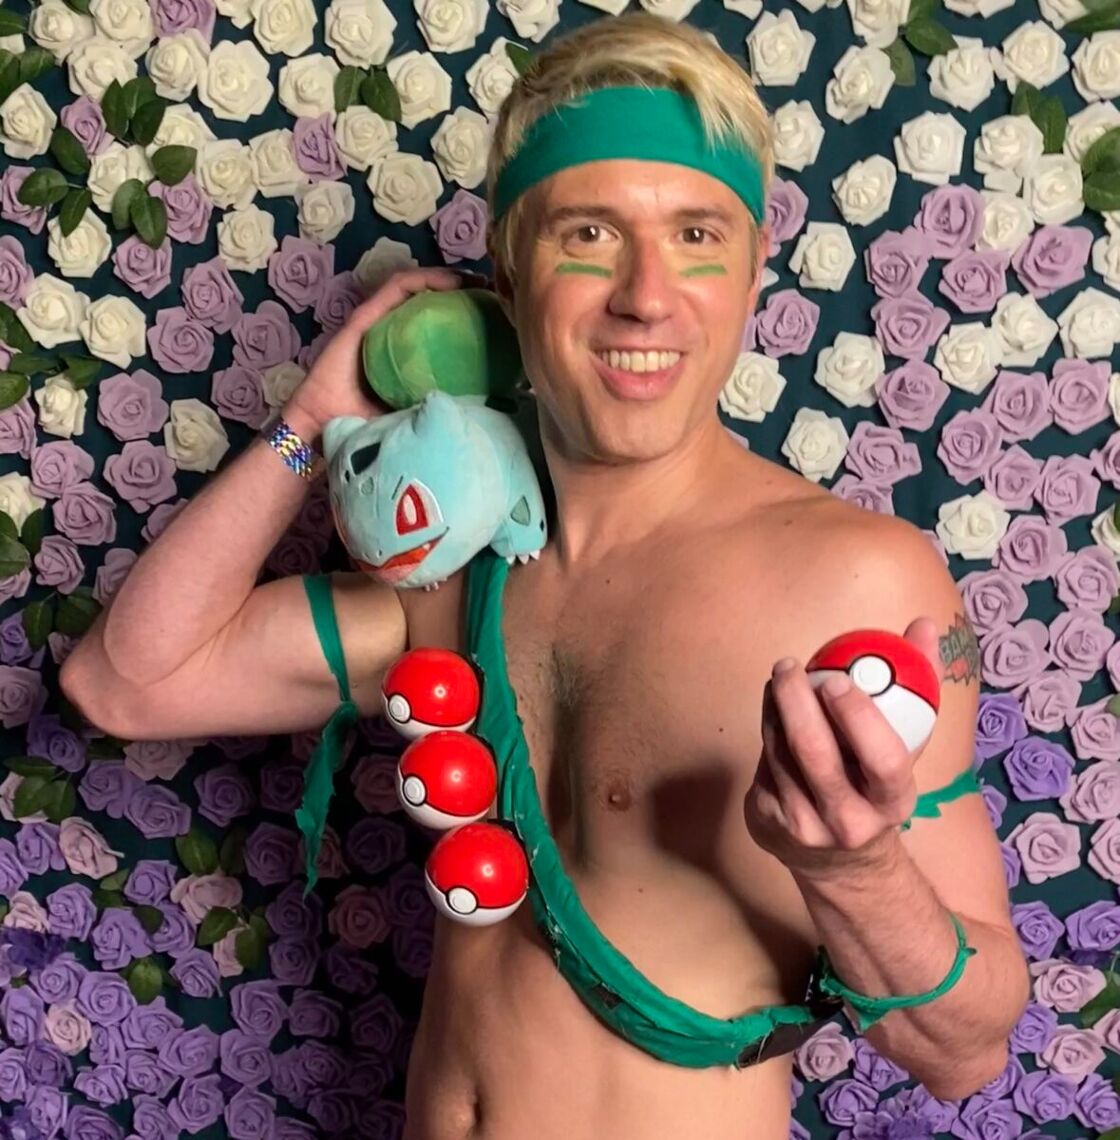 LA-based GlamCock BamBam getting geek chic with his Pokemon grass-type trainer ensemble. Gotta Snatch 'Em All!